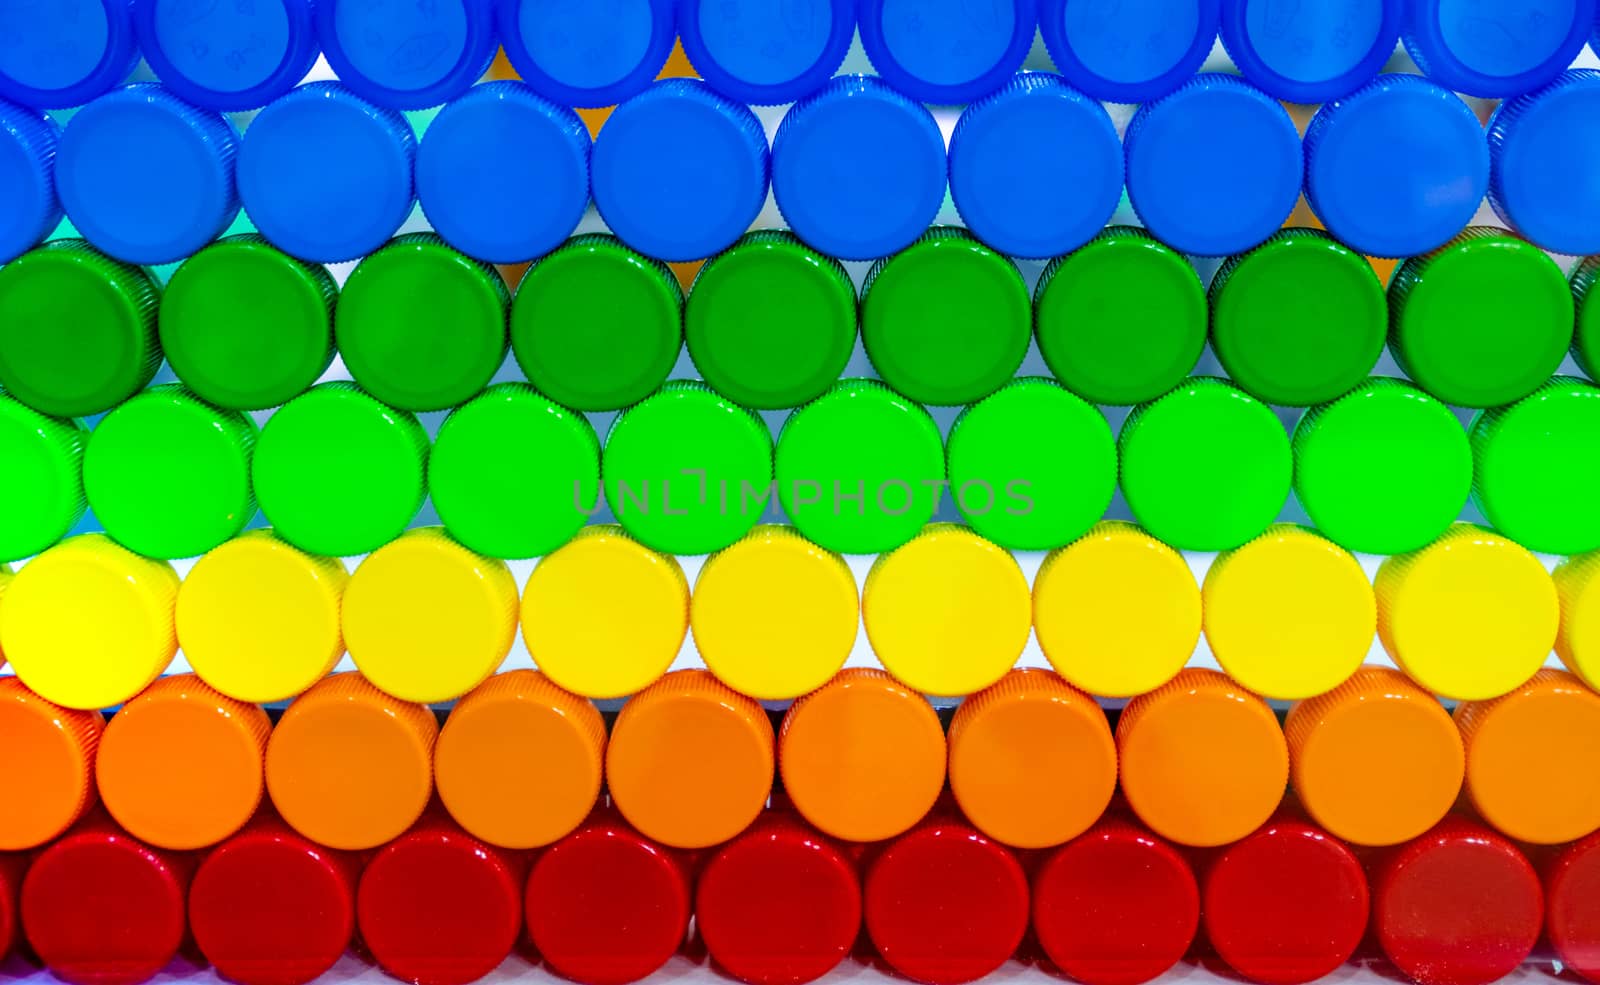 Colorful plastic bottle cap arrange with beautiful tone and pattern. Blue, green, yellow, orange, and red plastic bottle cap arrange with orderly. Cap for bottle of water, and other drink. Cap closure